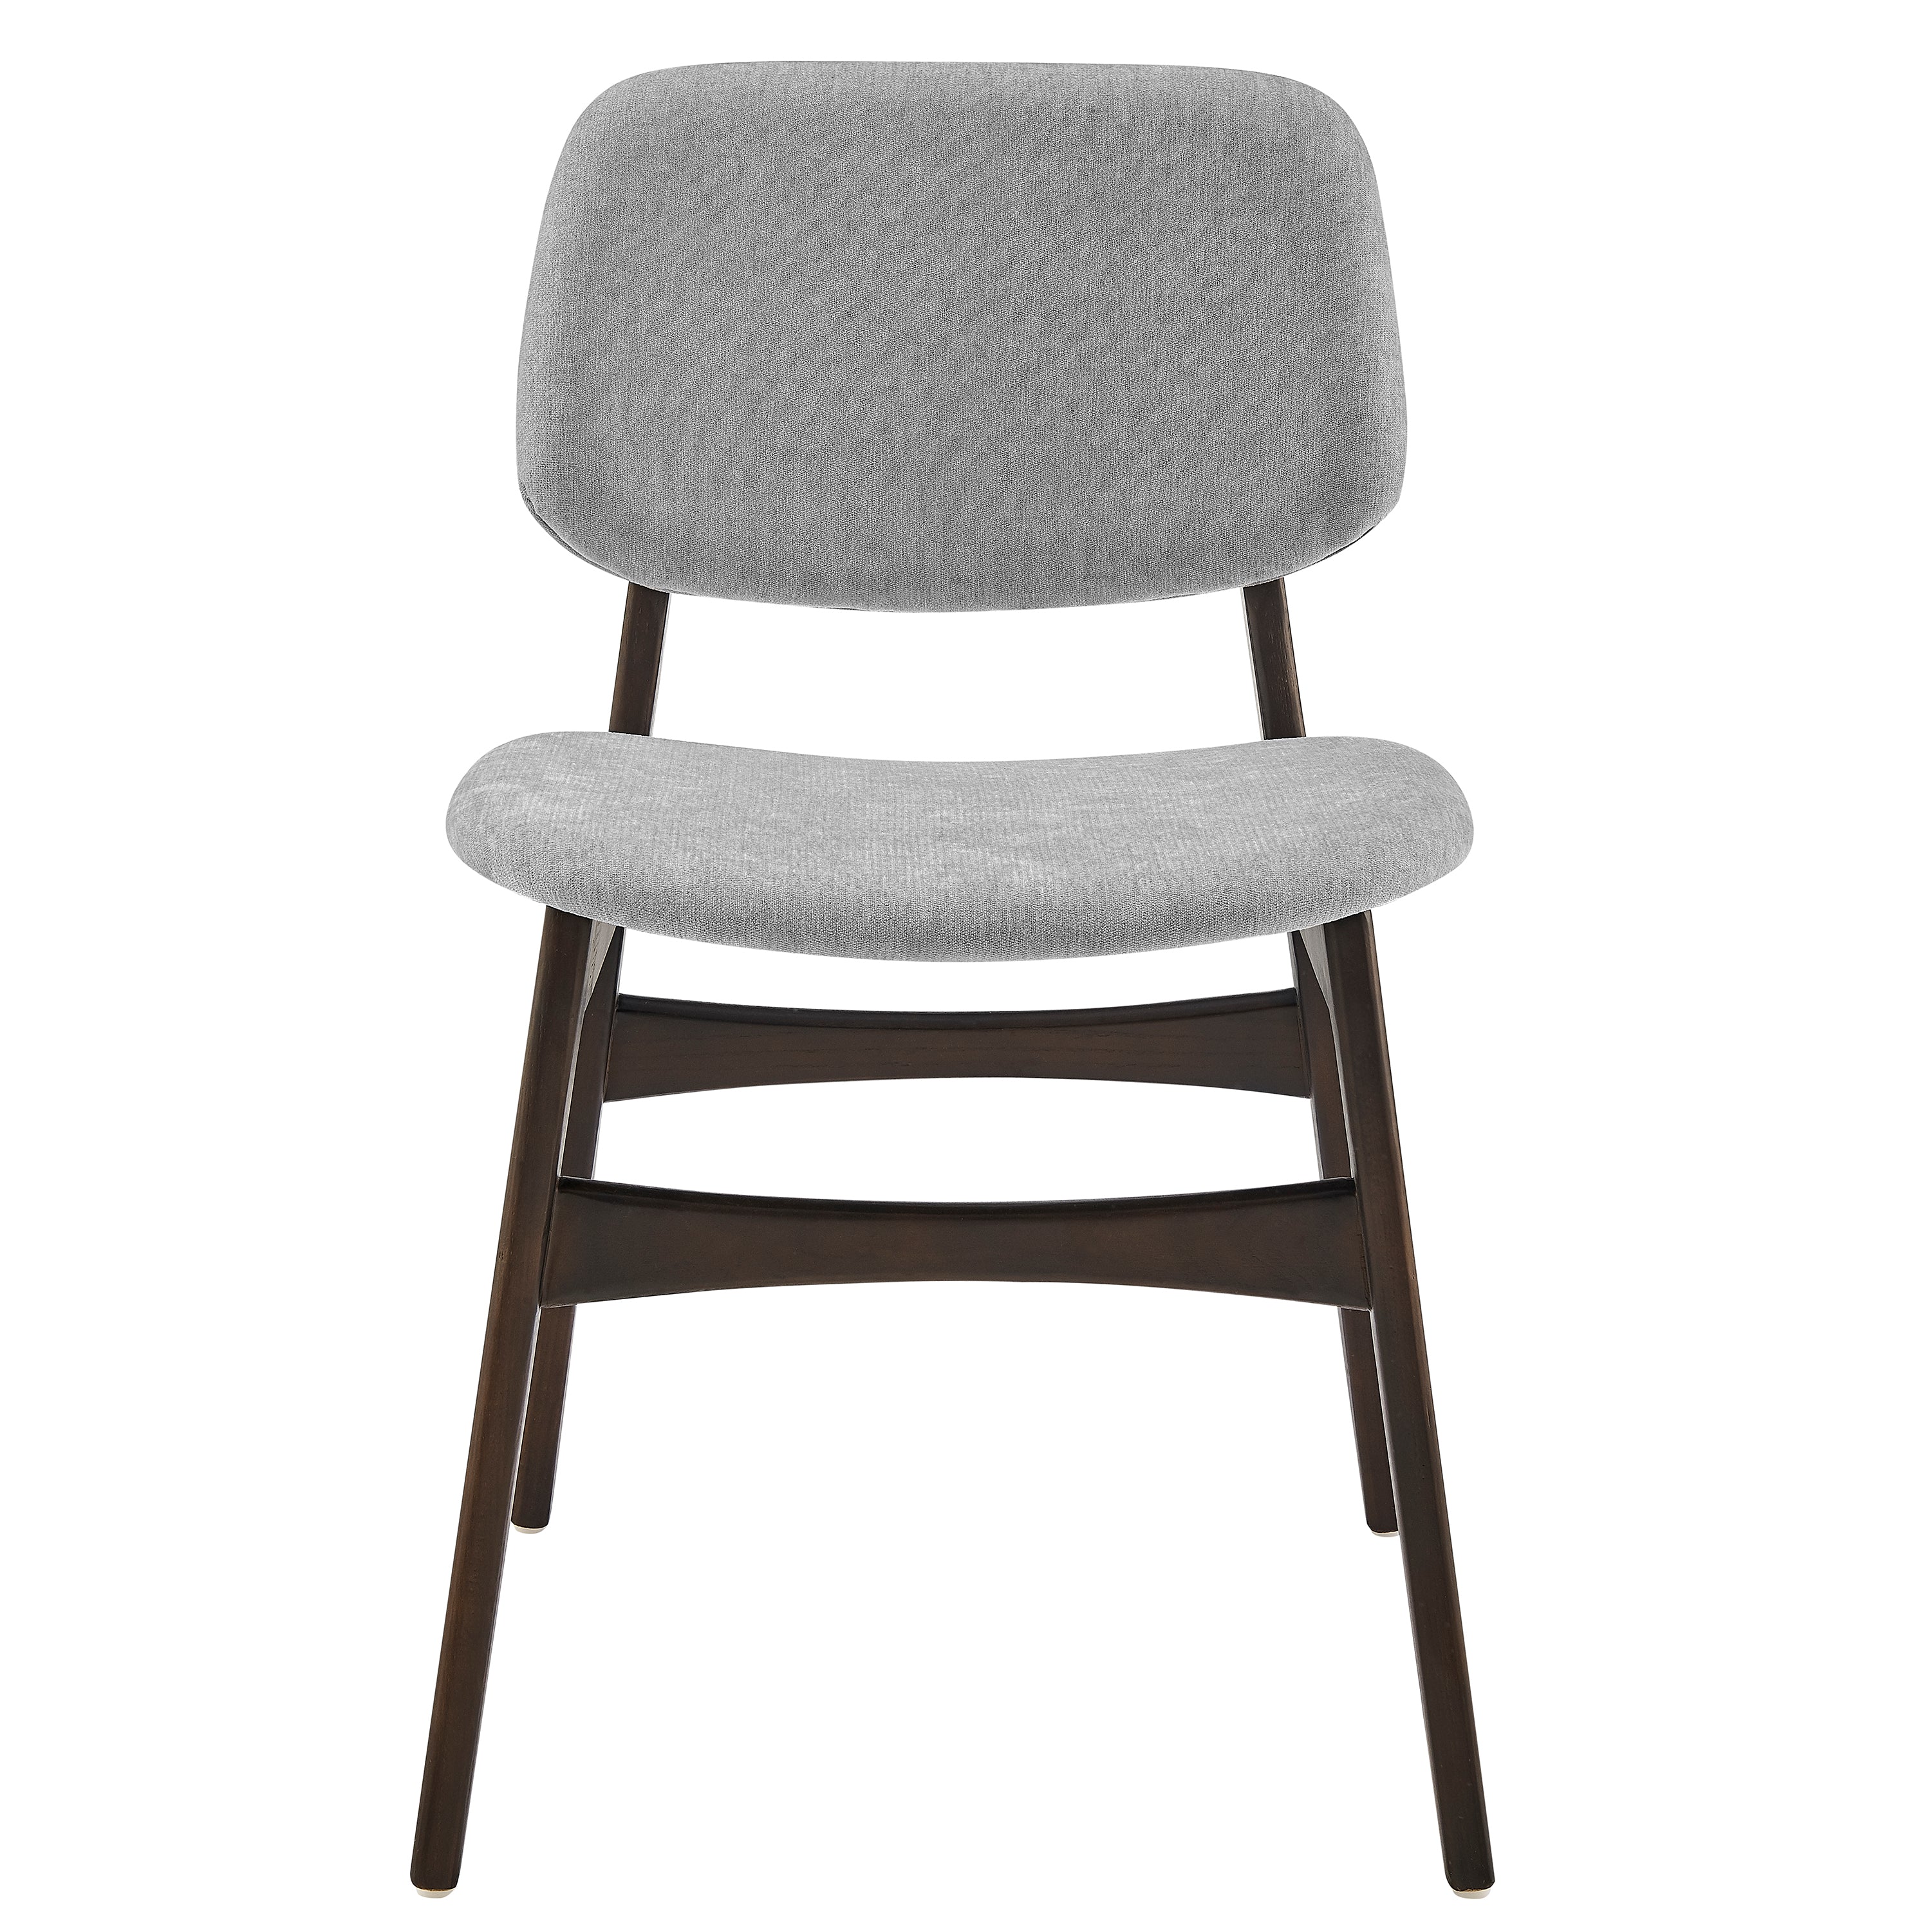 Euro Style Dining Chairs - Gunther Side Chair with Gray Fabric and Dark Walnut Frame - Set of 2